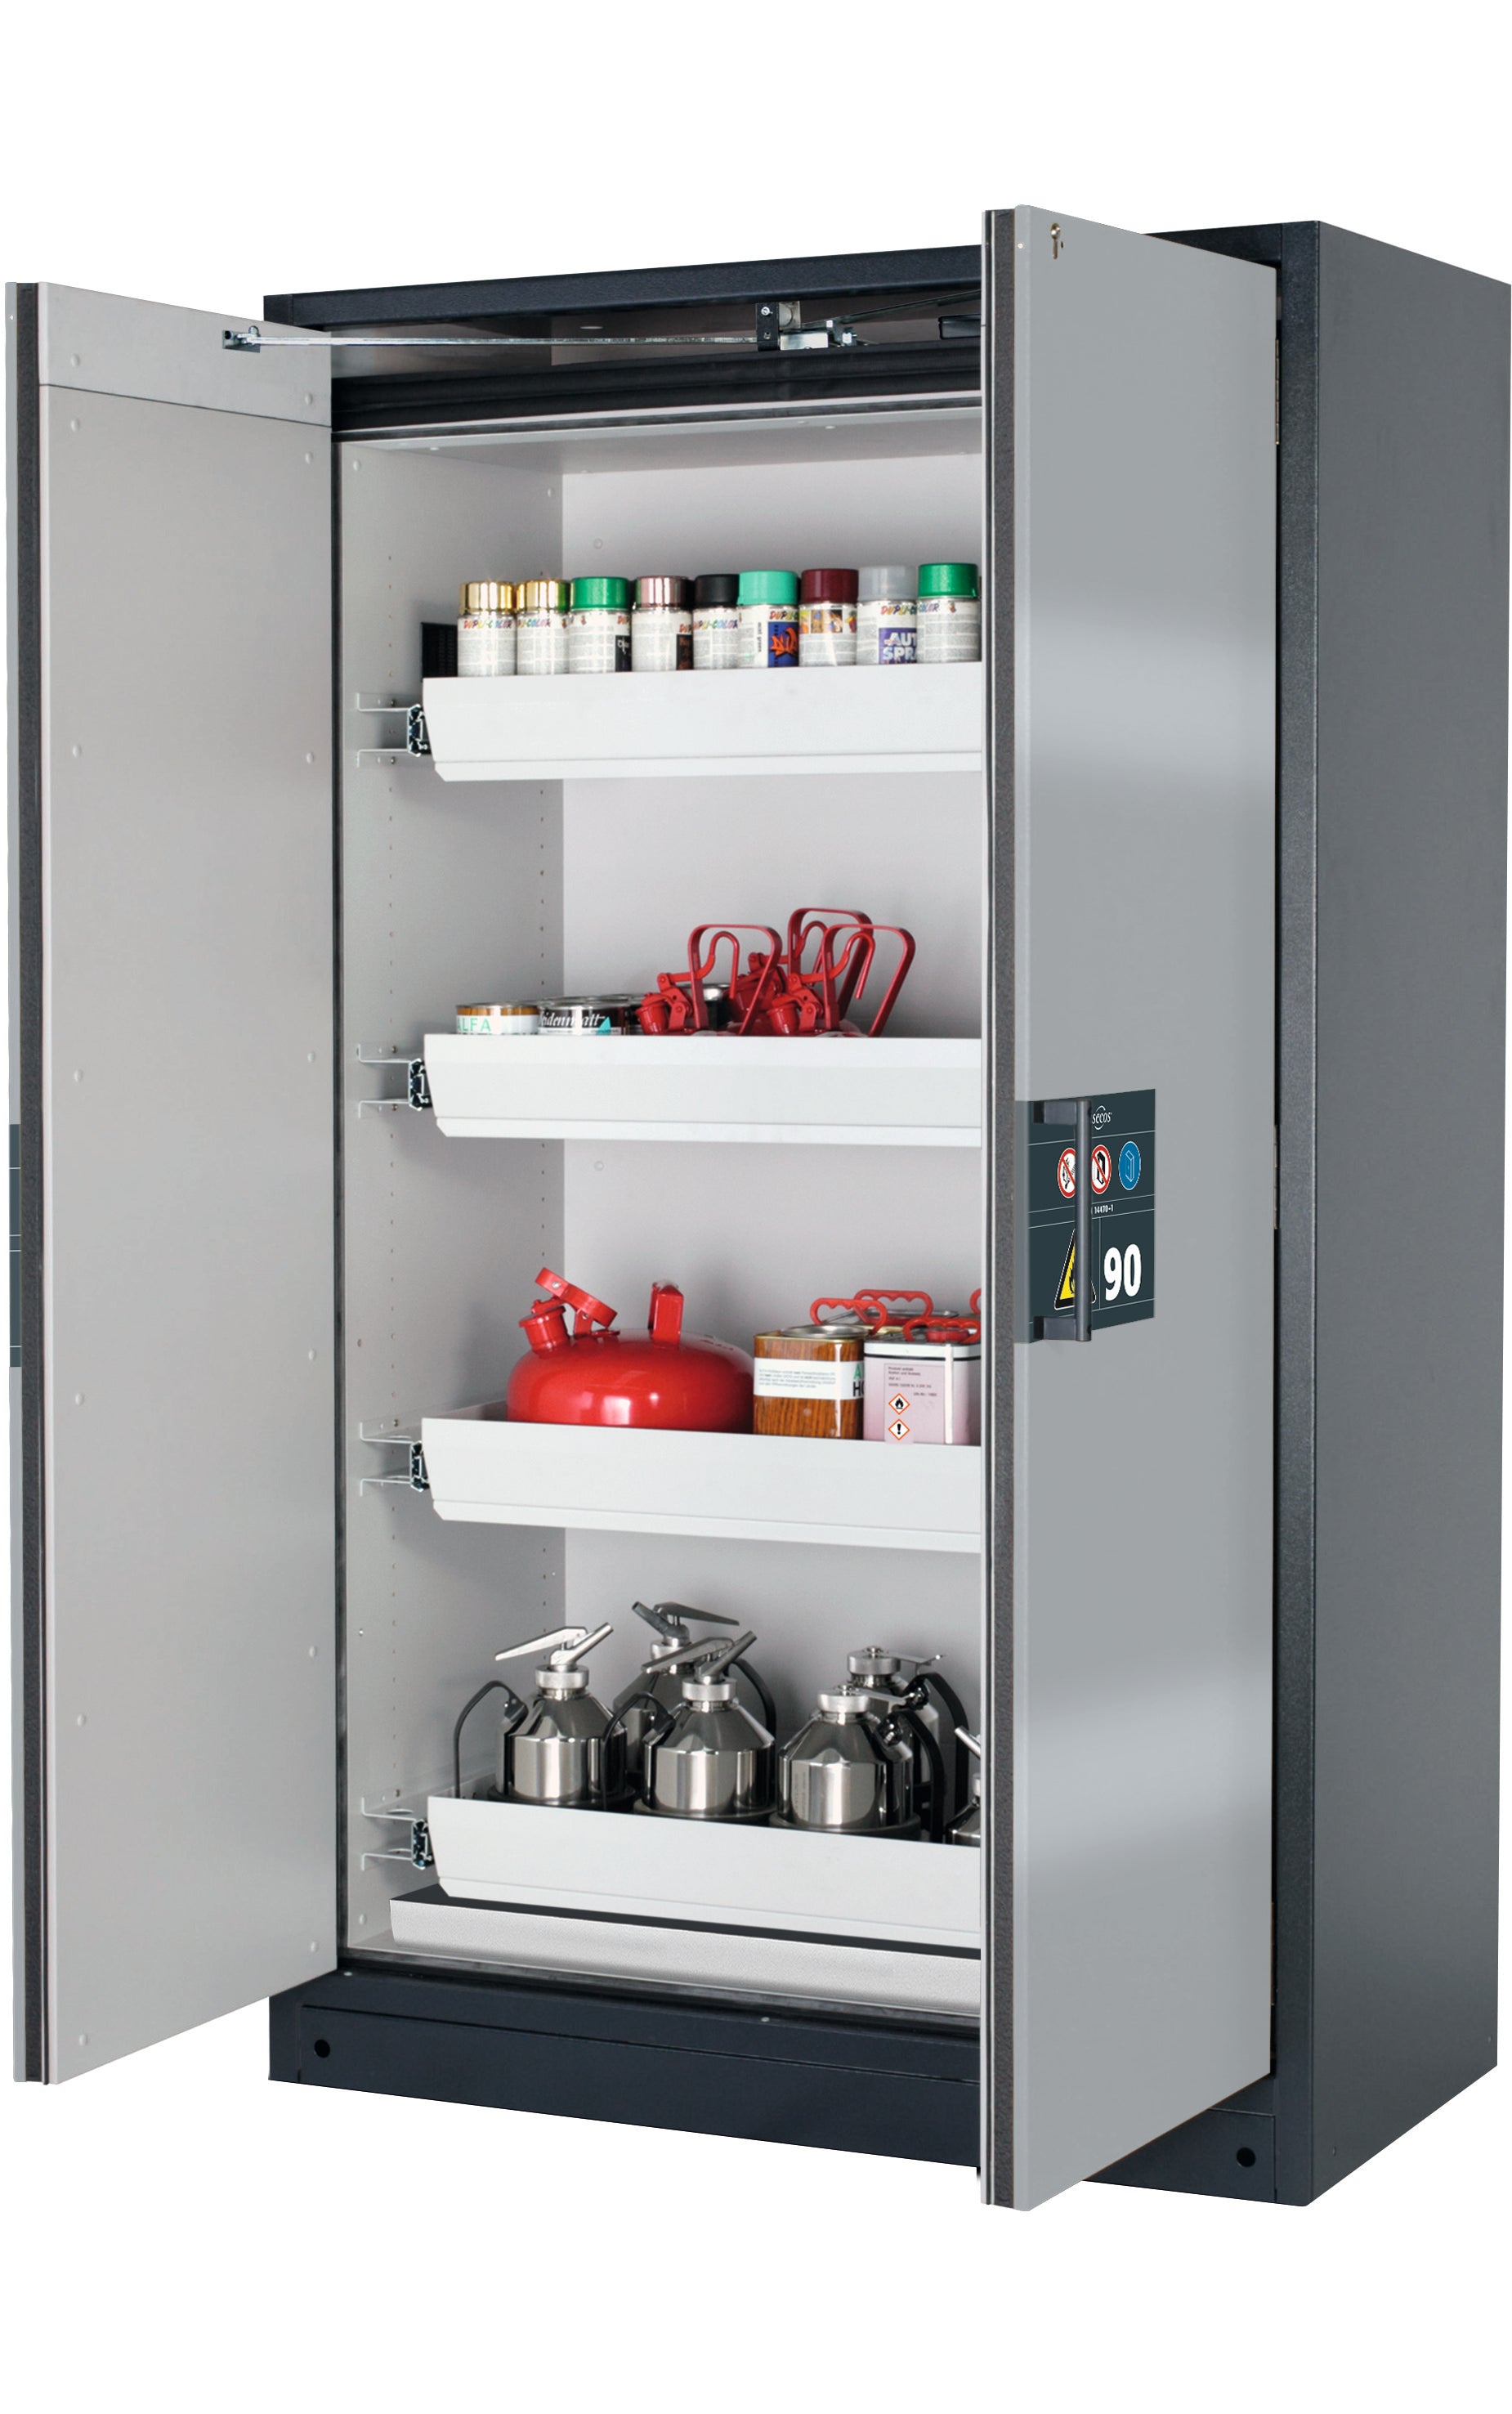 Type 90 safety storage cabinet Q-PEGASUS-90 model Q90.195.120.WDAC in asecos silver with 4x drawer (standard) (sheet steel),